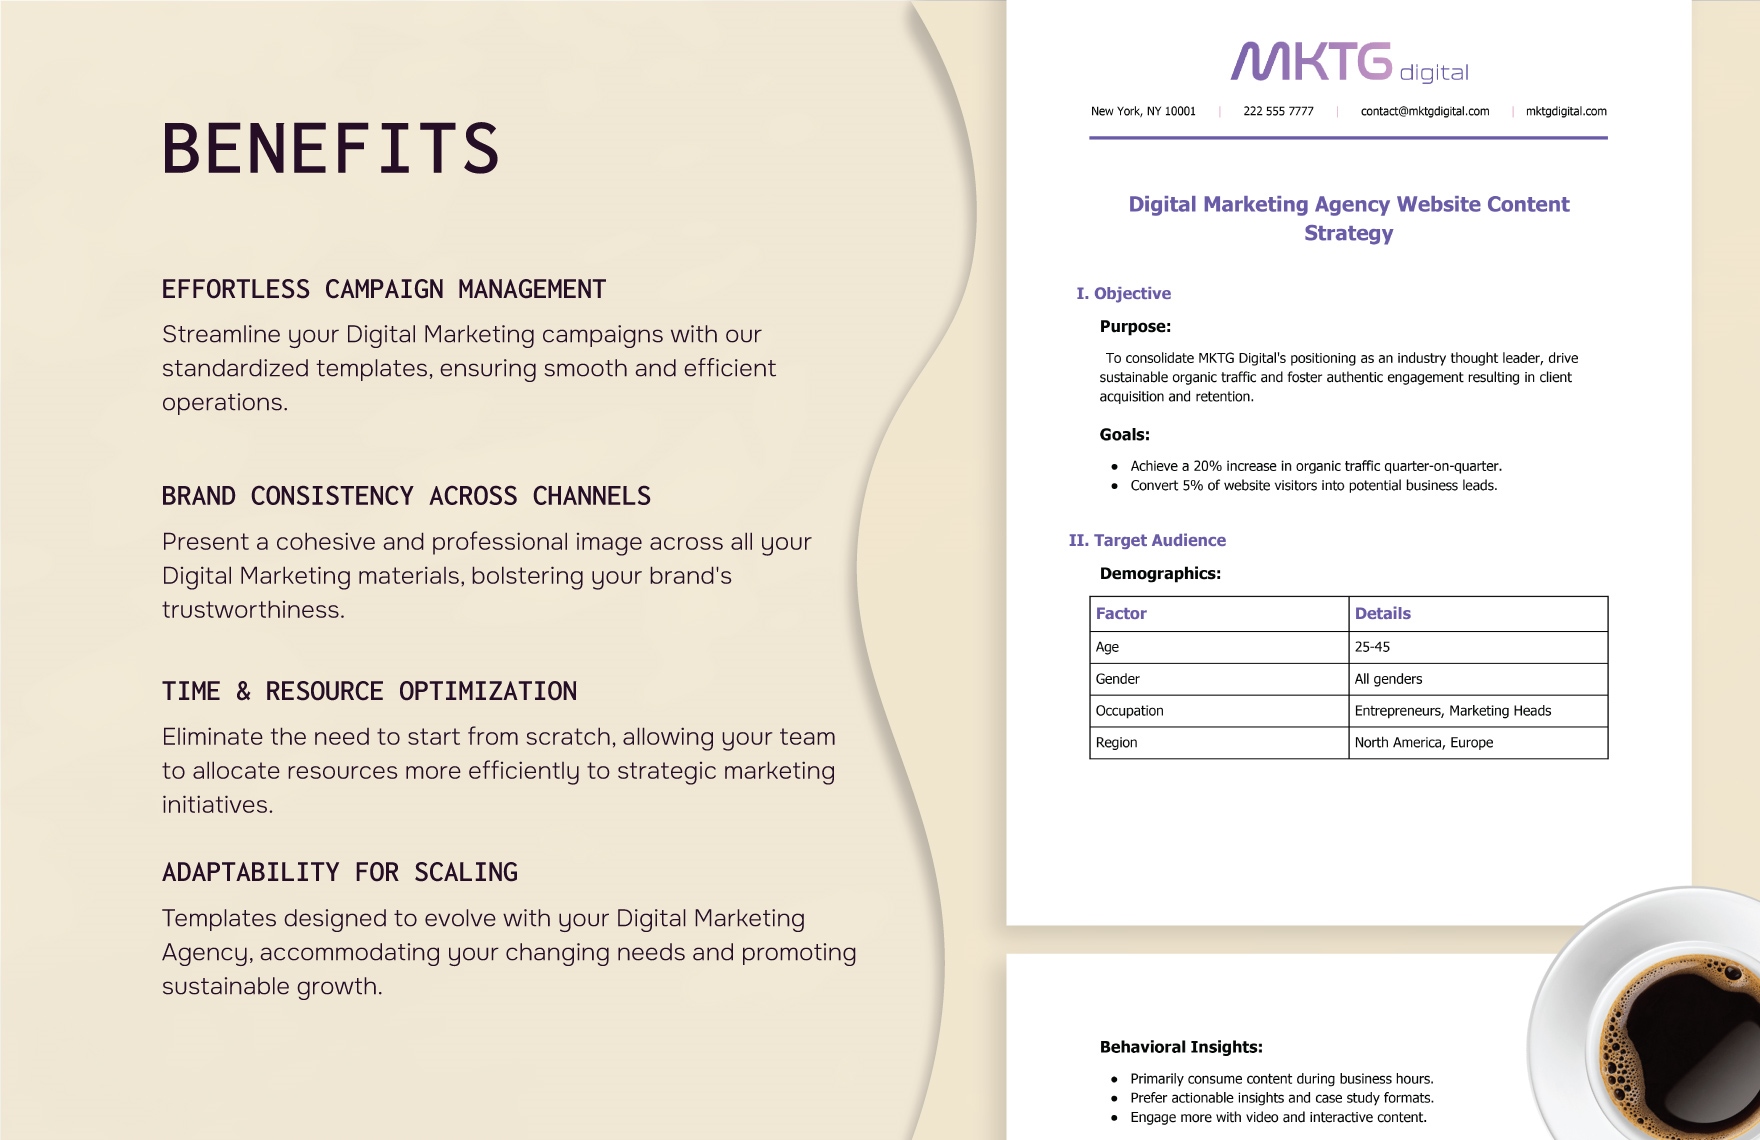 Digital Marketing Agency Website Content Strategy Template